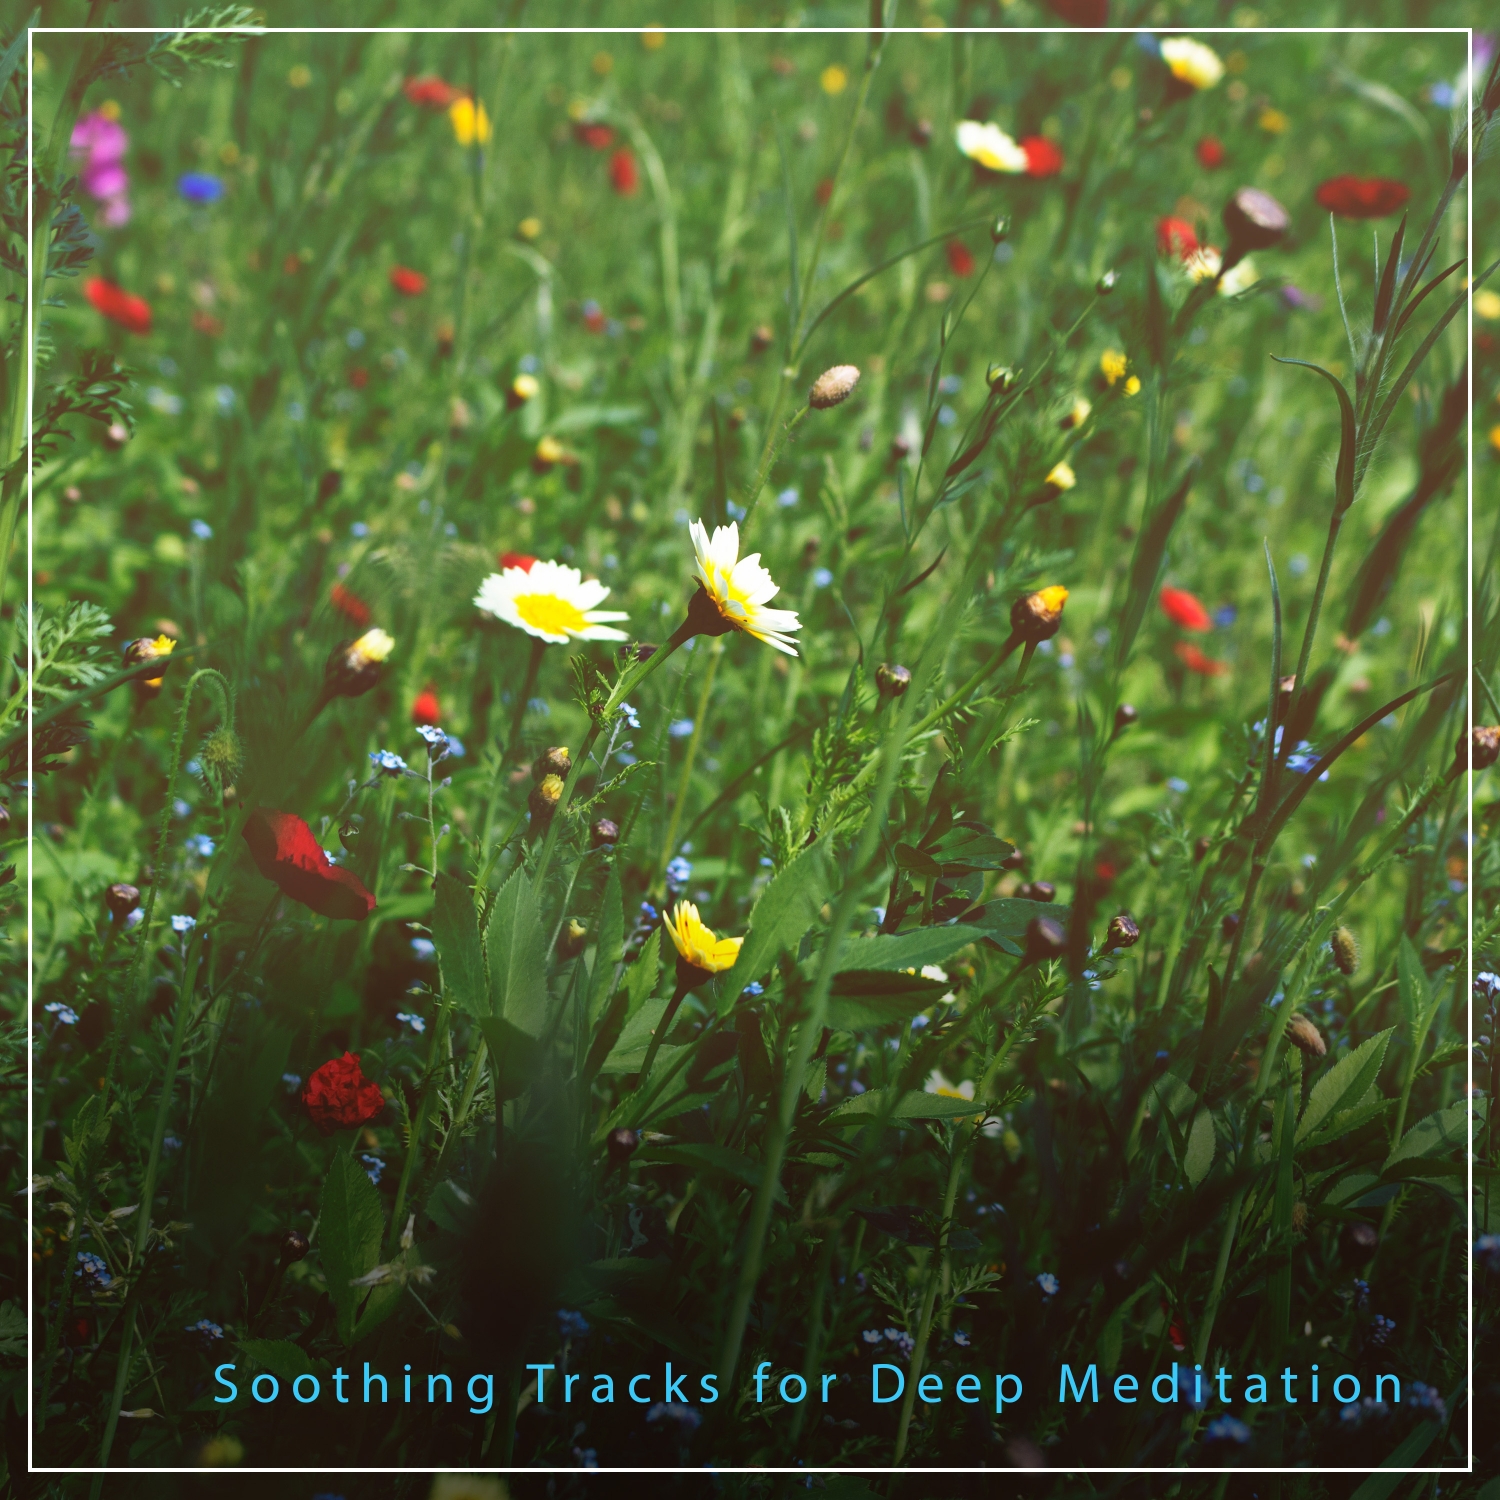 15 Soothing Tracks for Deep Meditation and Relaxation